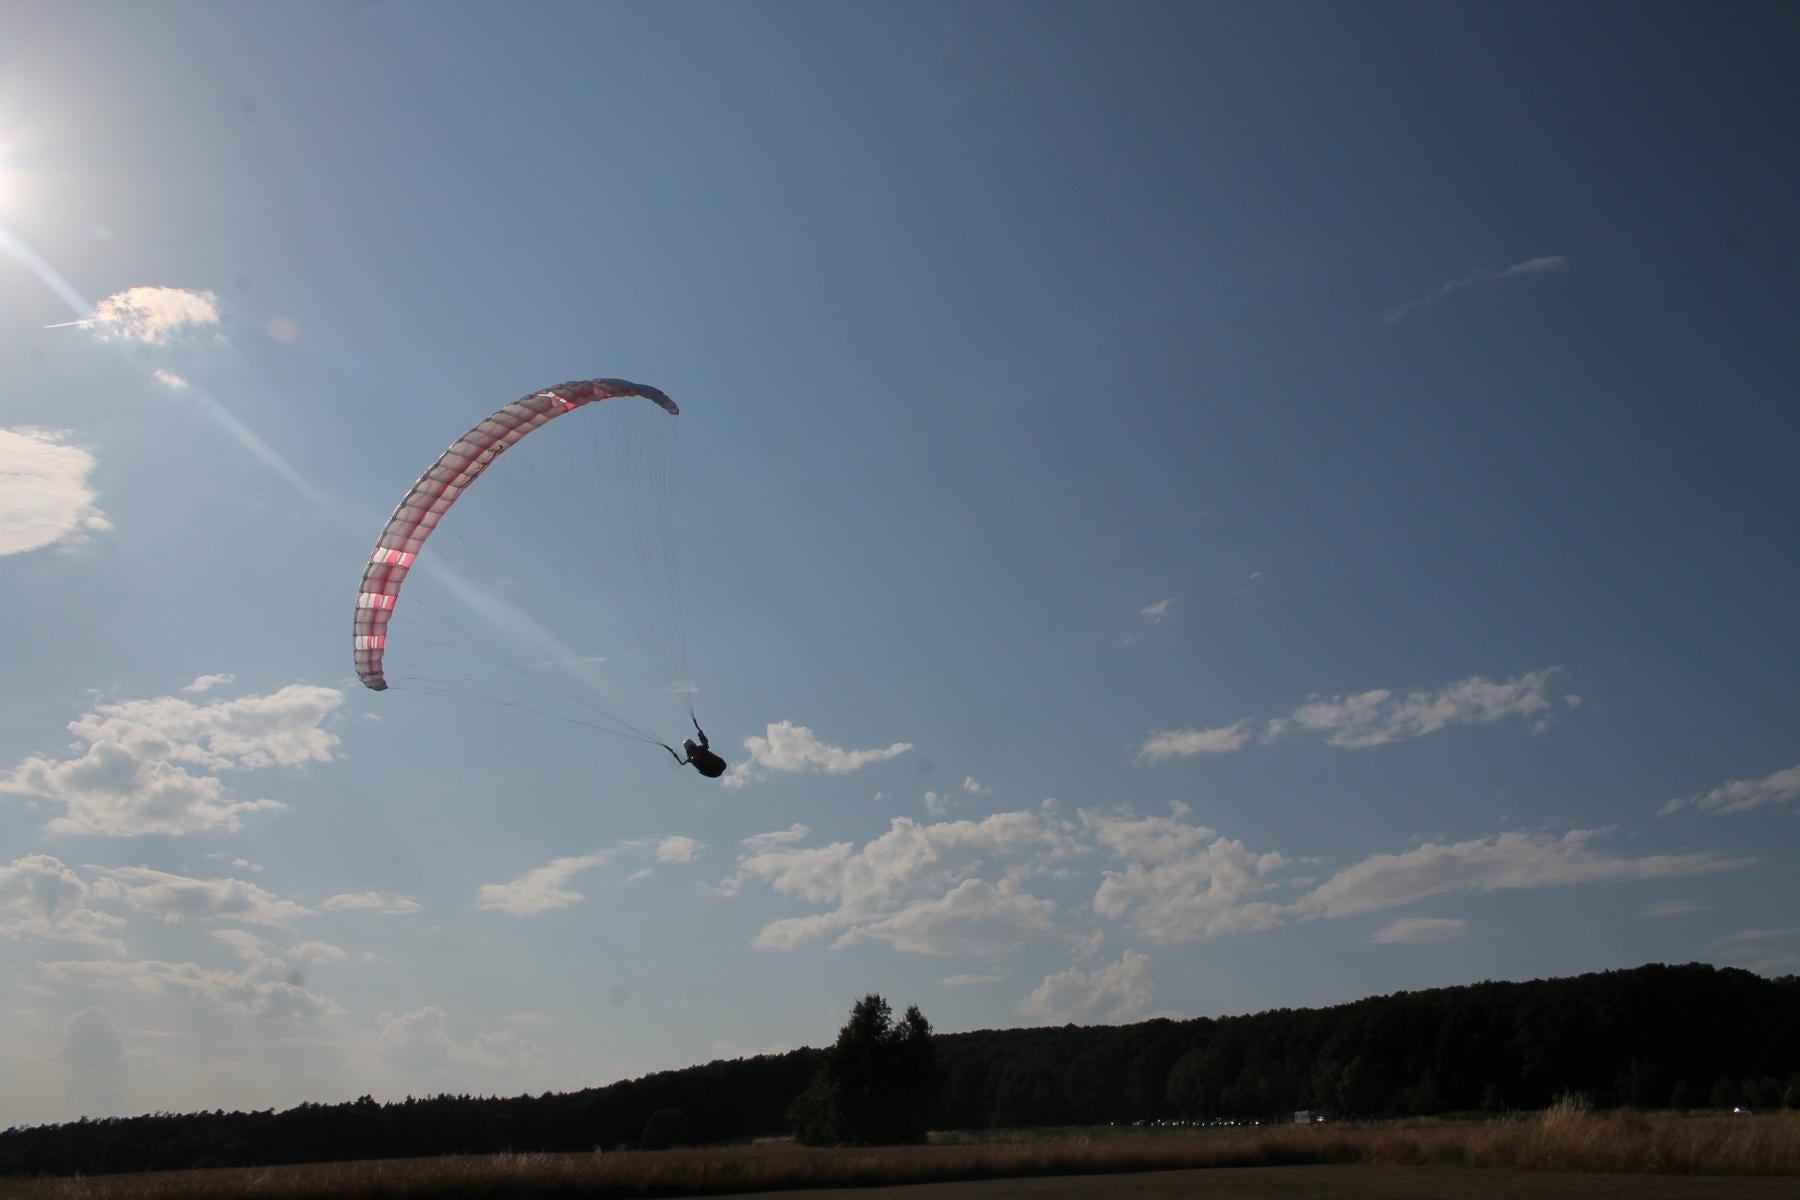 DMFV Treffen "Fly togehter - fly with friends" Hallerndorf Para Aviation RC RC-Gleitschirme RC-Paragliding Stable 2.1 Race Rast Hybrid